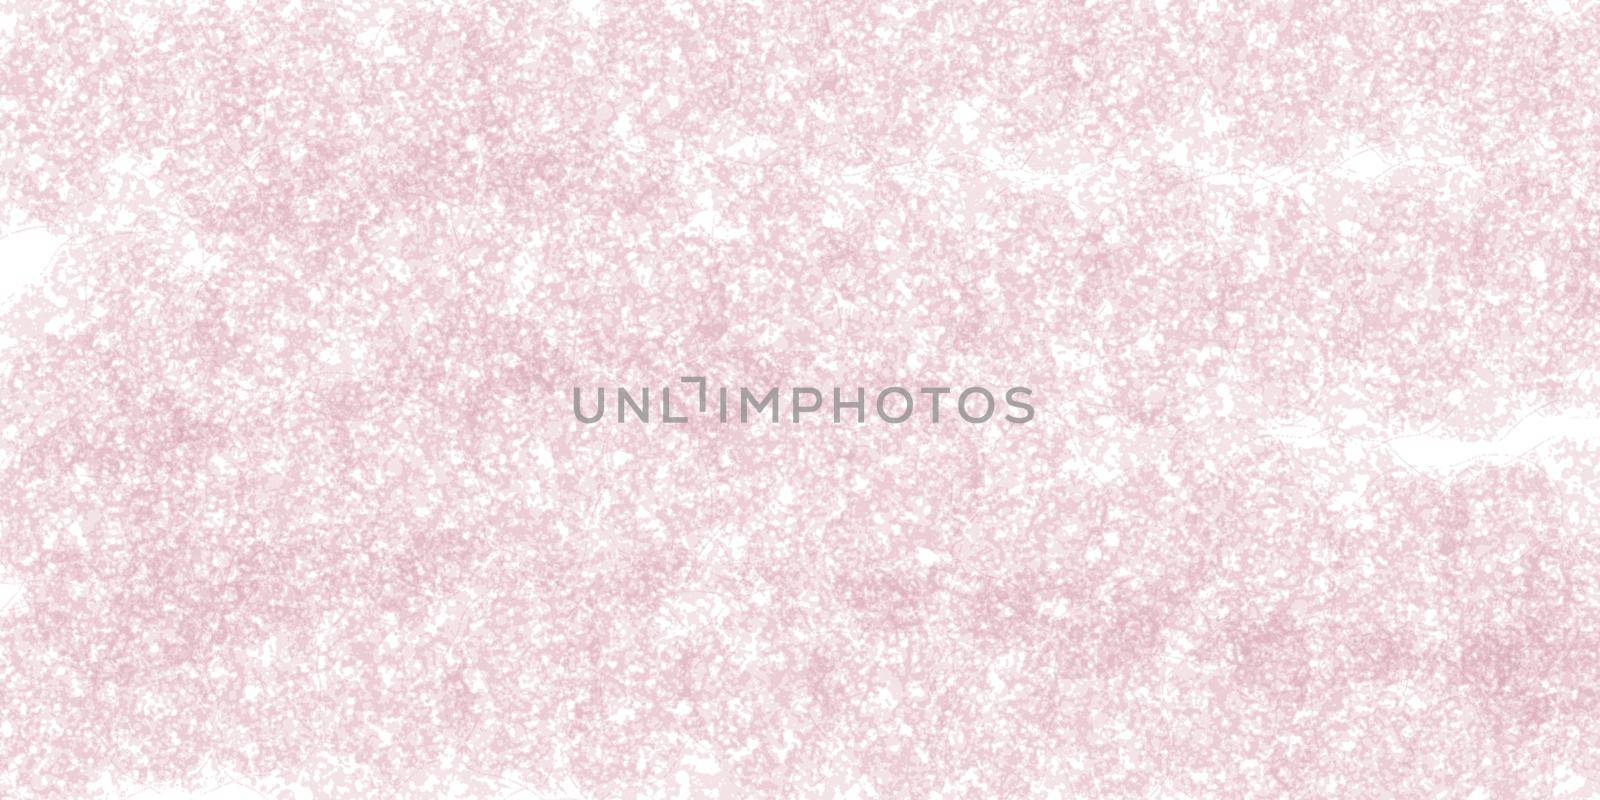 illustration of the pink texture imitation of watercolor paint by Eldashev